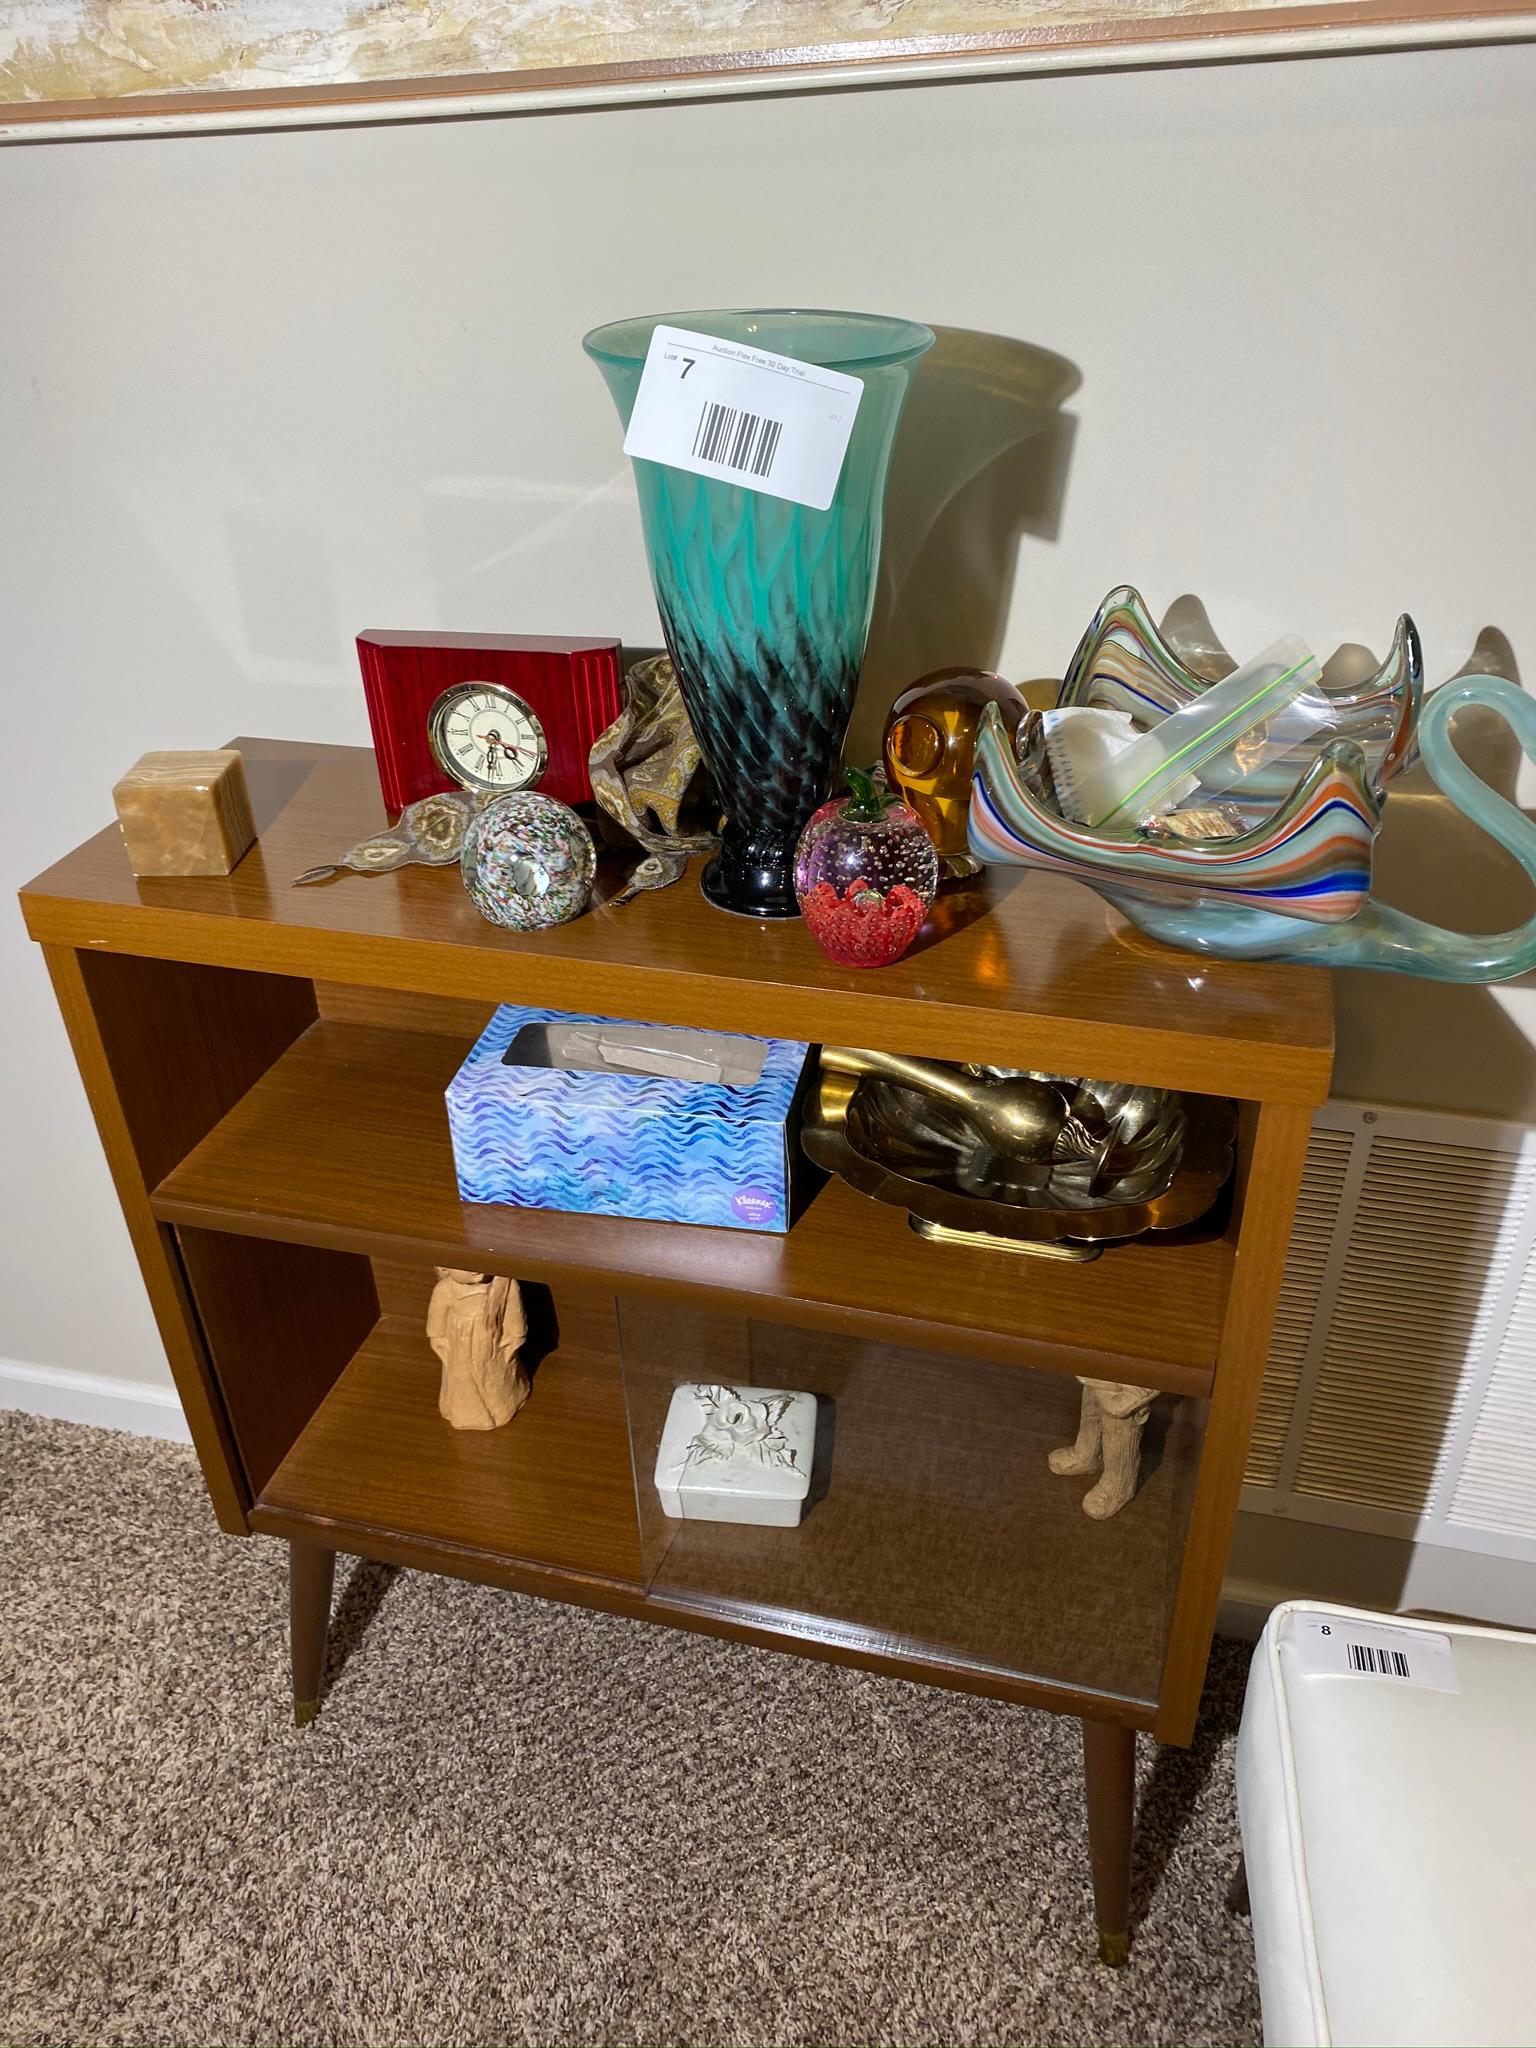 Contents of mid century stand